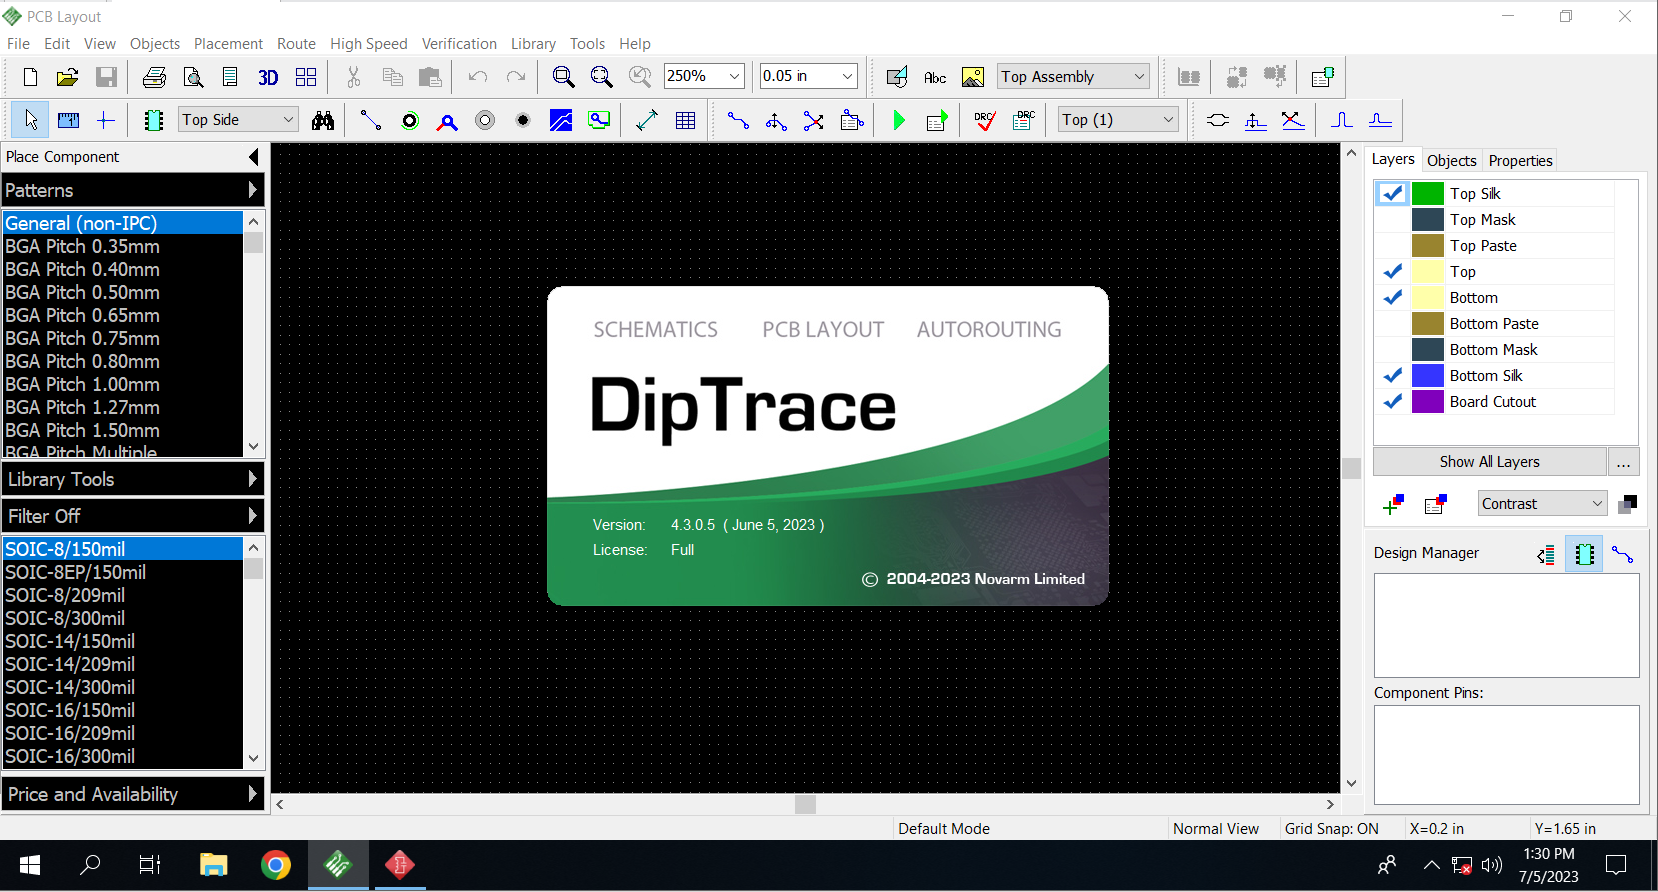 Working with DipTrace 4.3.0.5 full license